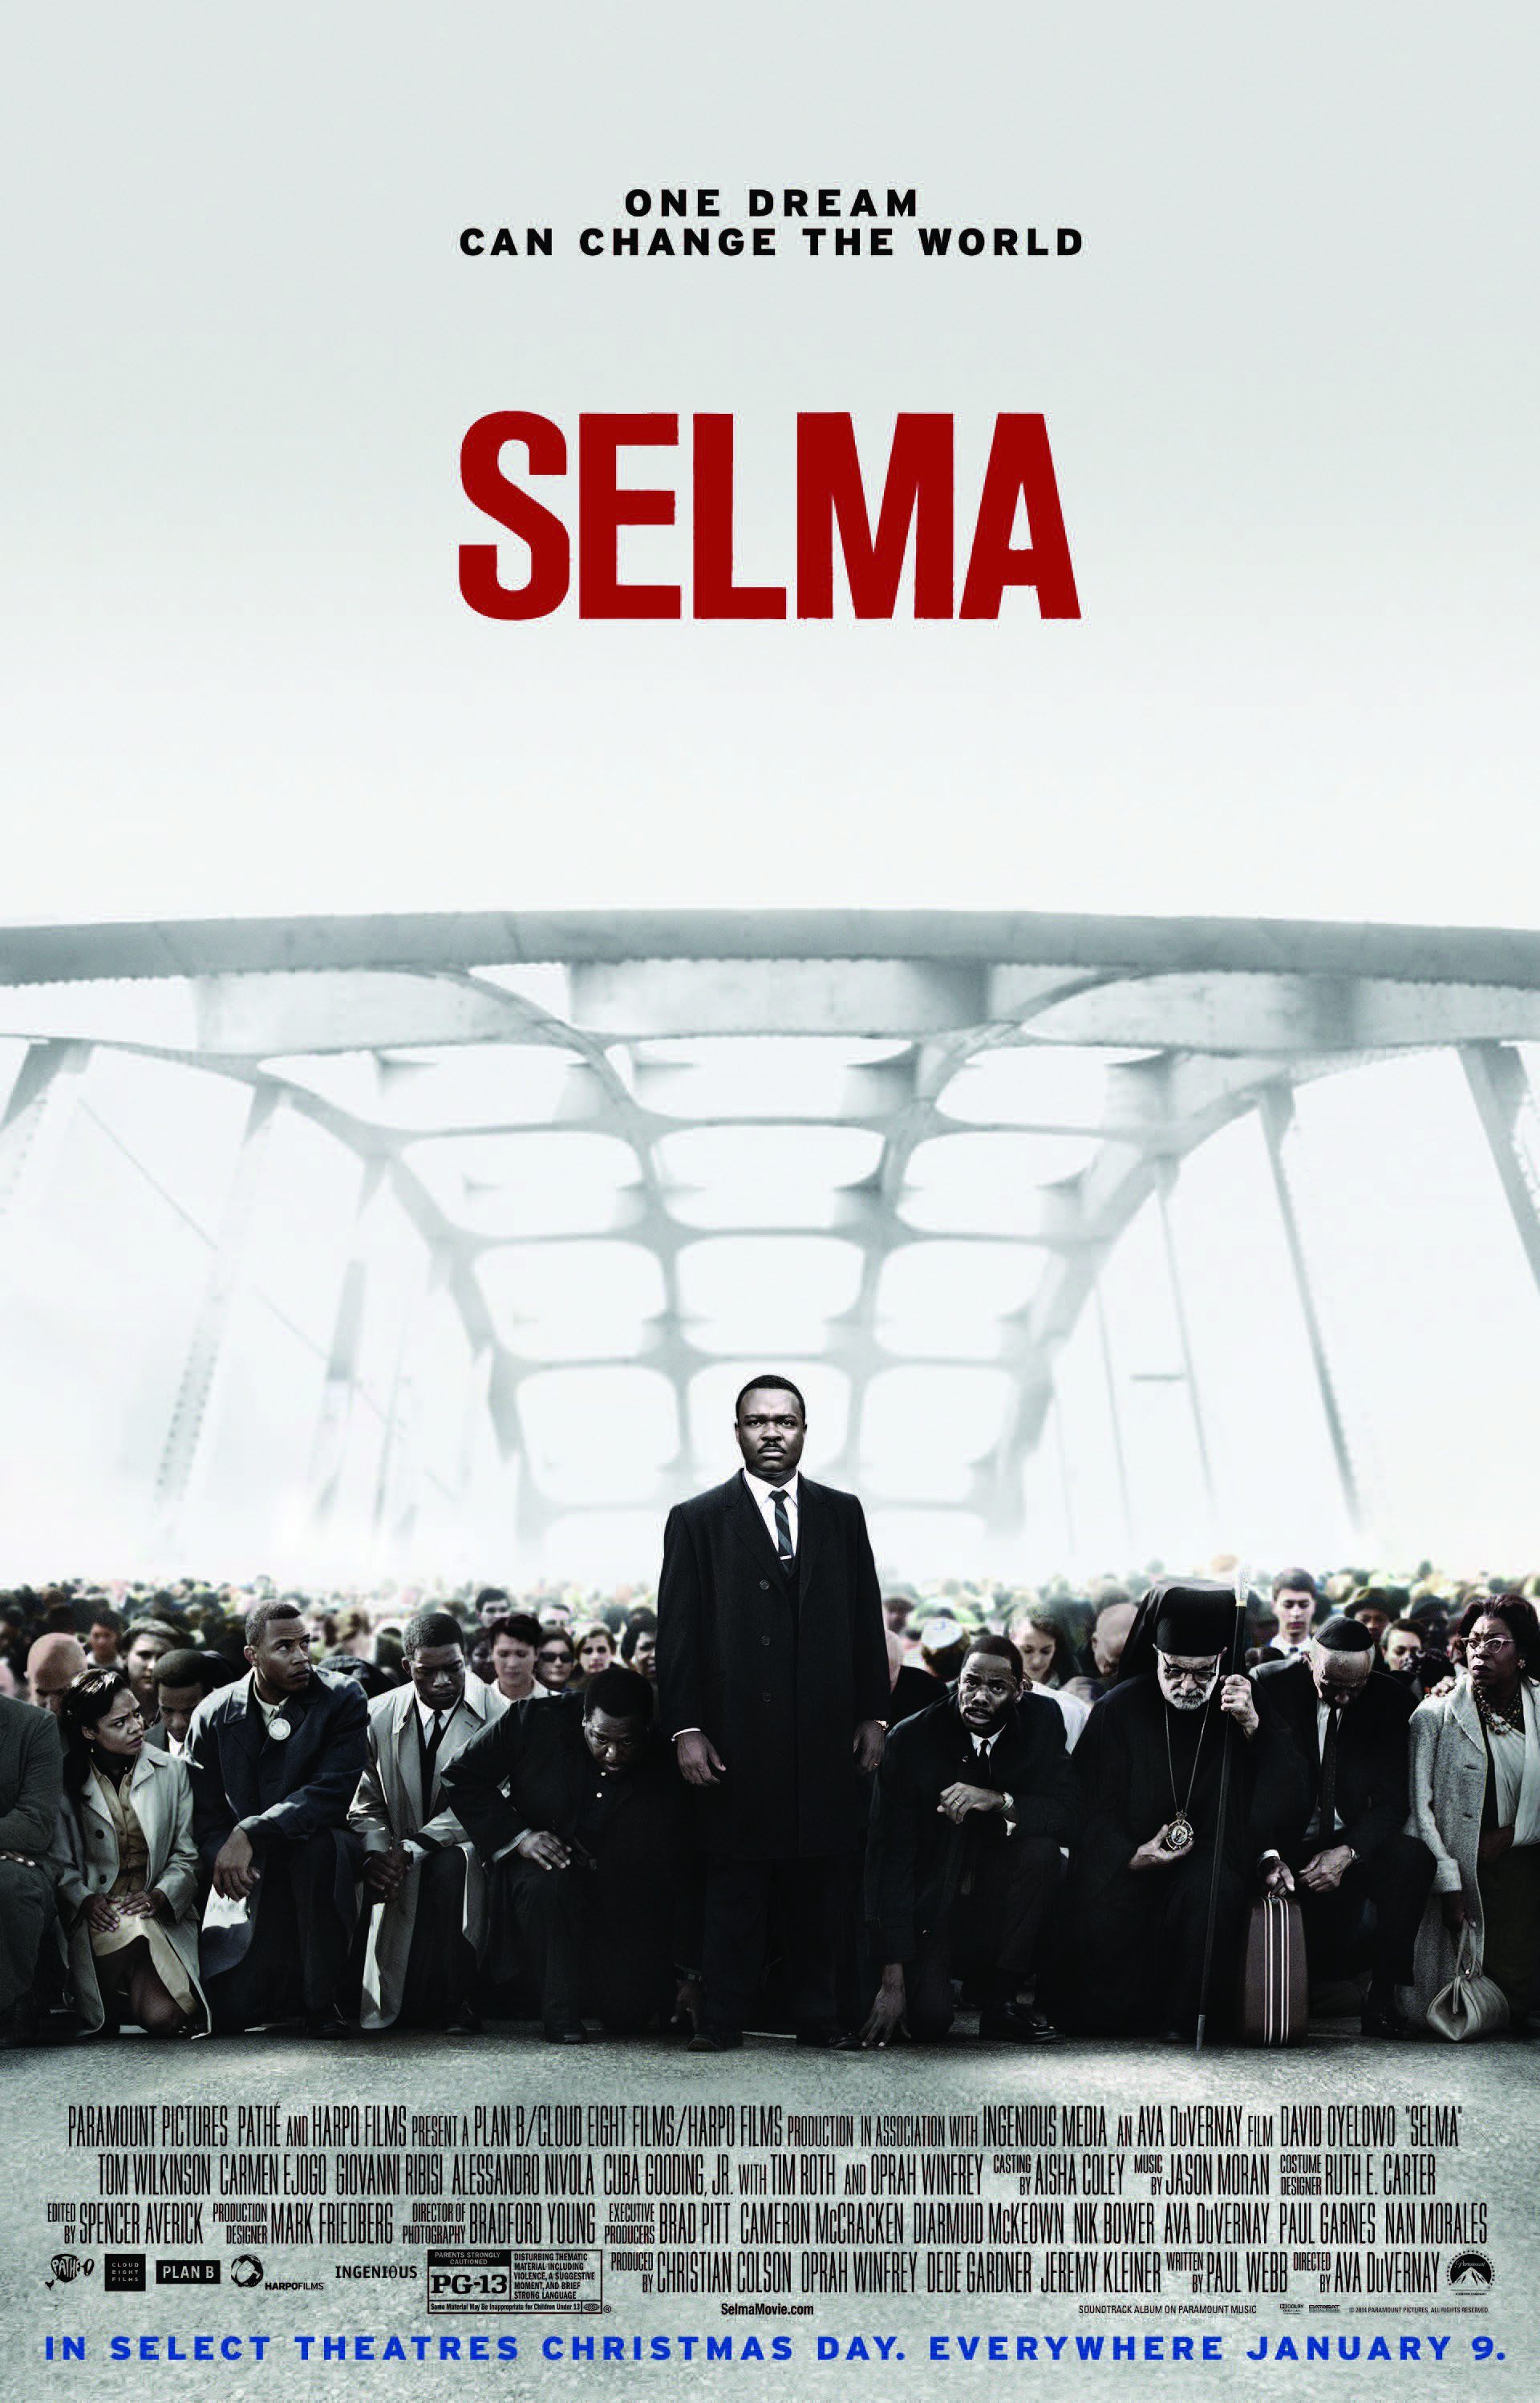 Poster for film Selma, portrayal of Dr. Martin Luther King Jr. surrounded by people on Selma March